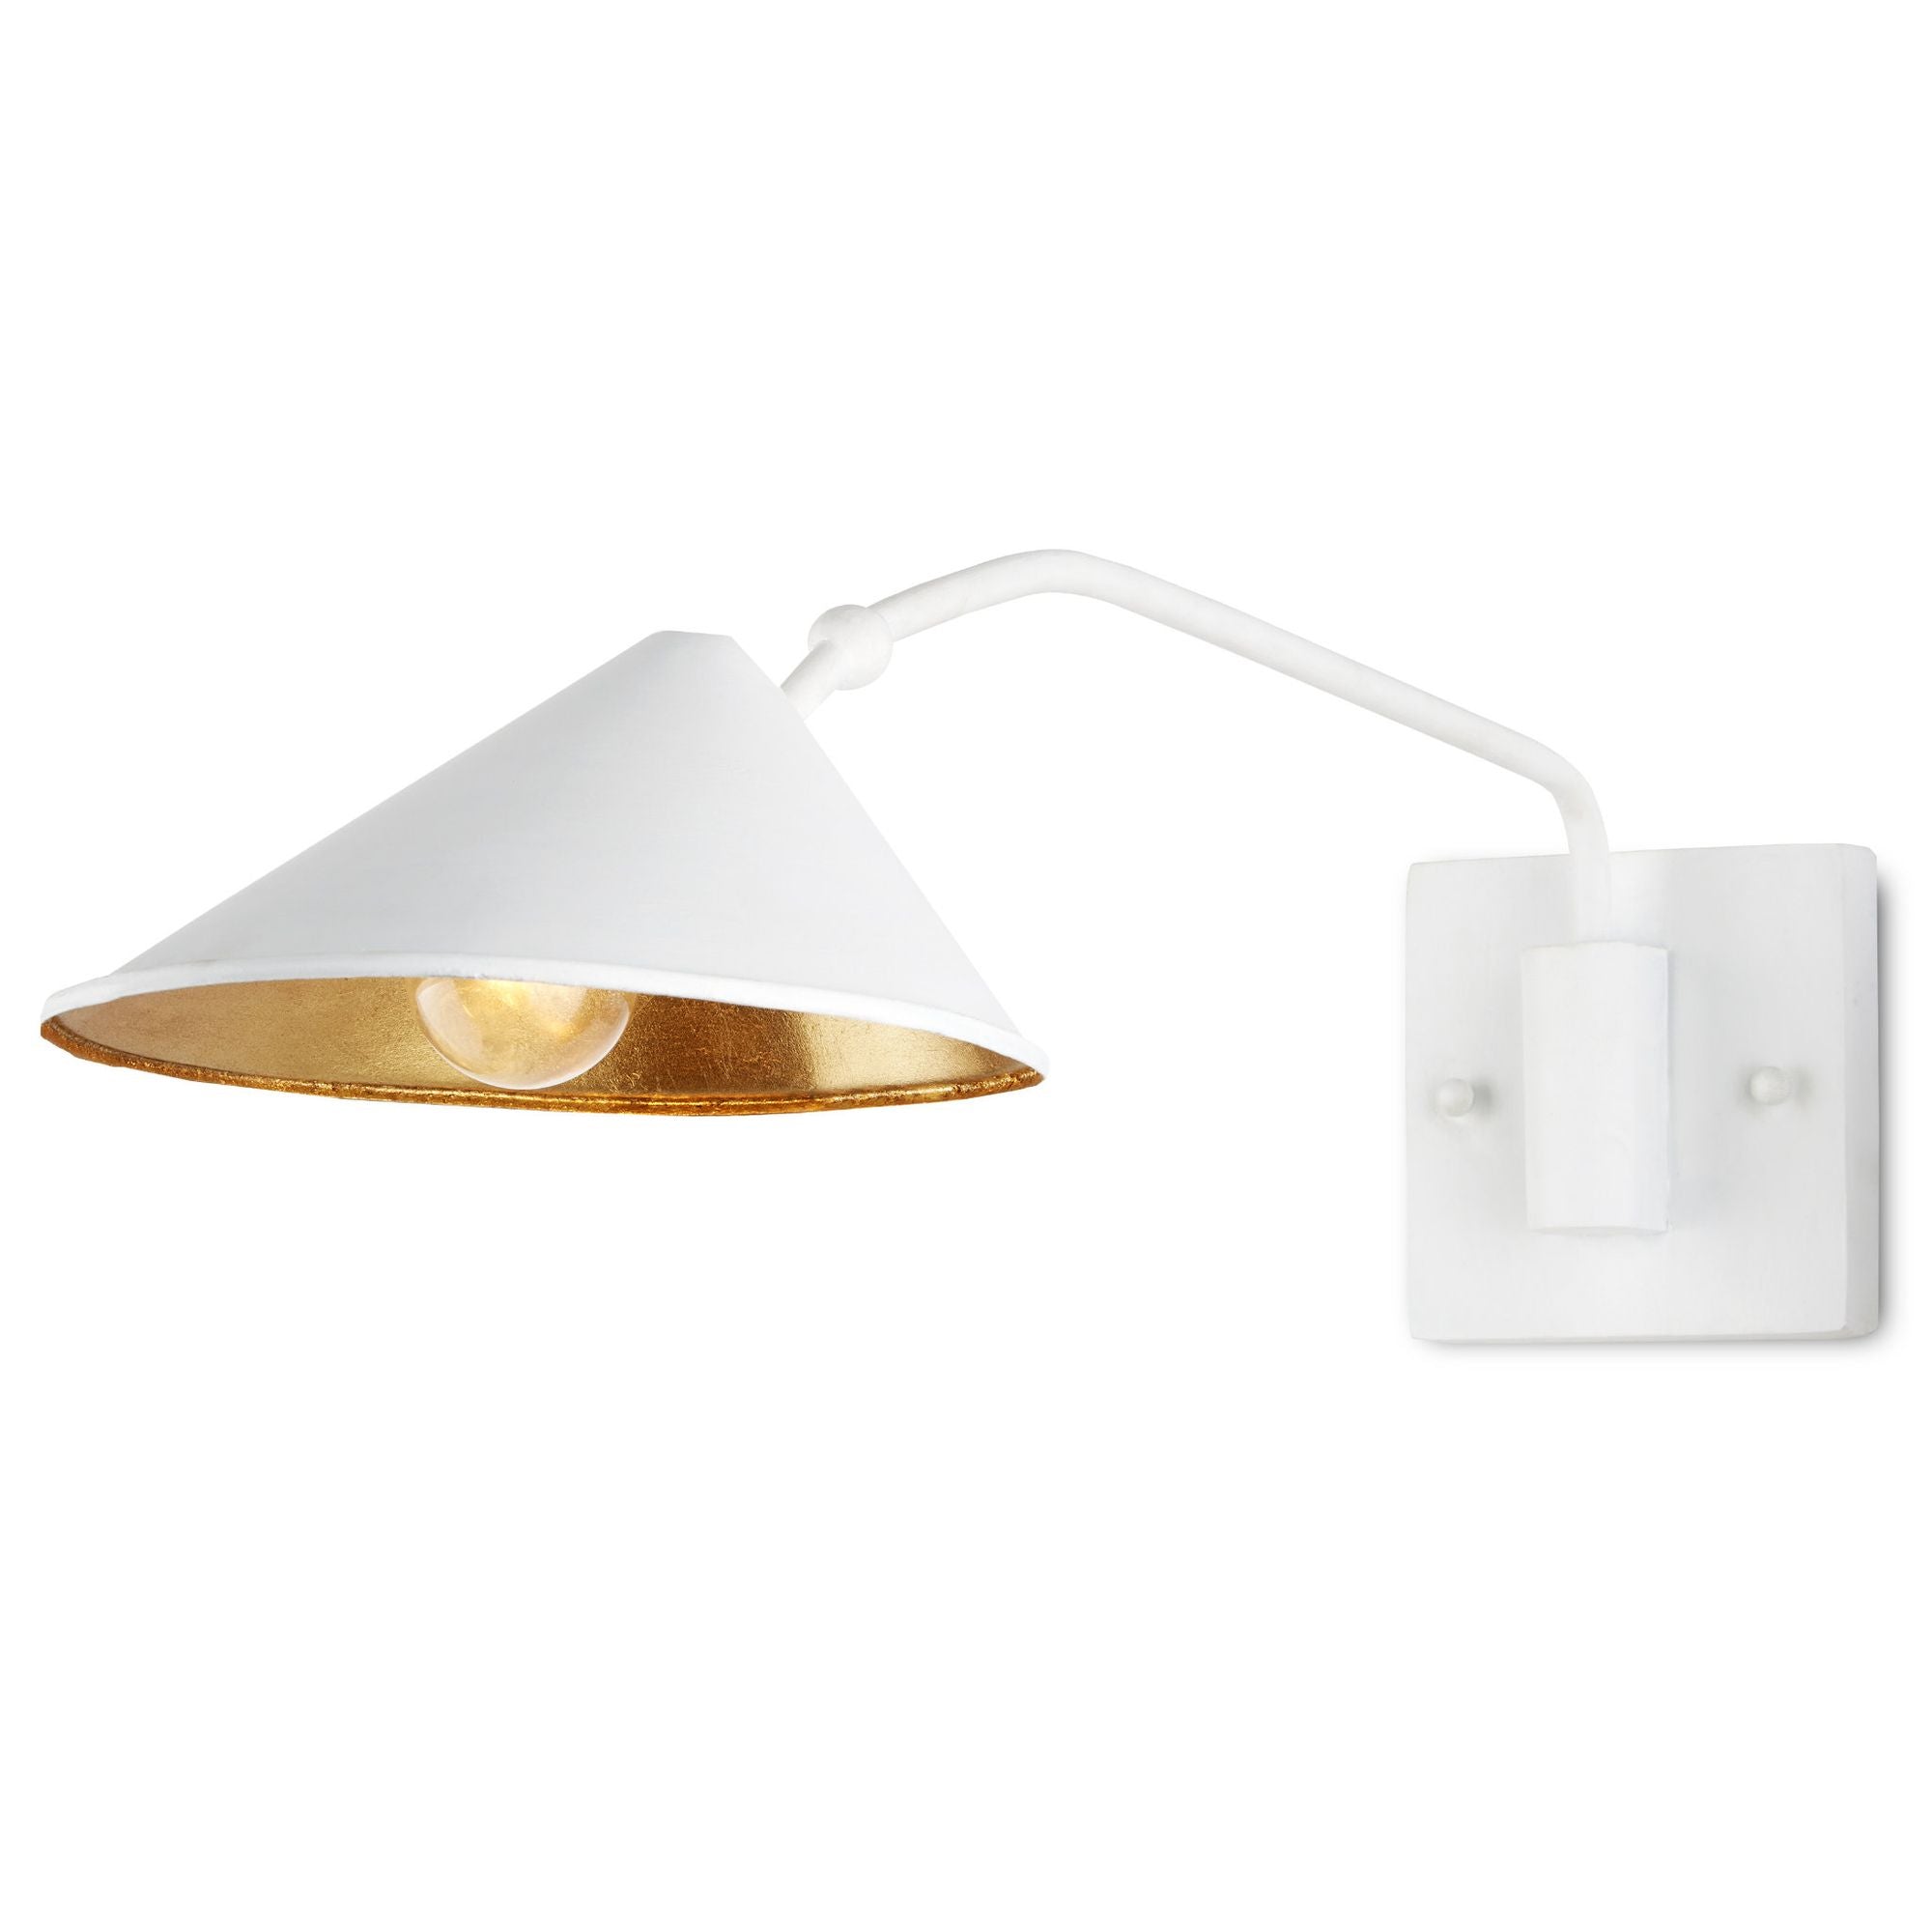 Serpa Whilte Single Swing-Arm Wall Sconce - Gesso White/Contemporary Gold Leaf